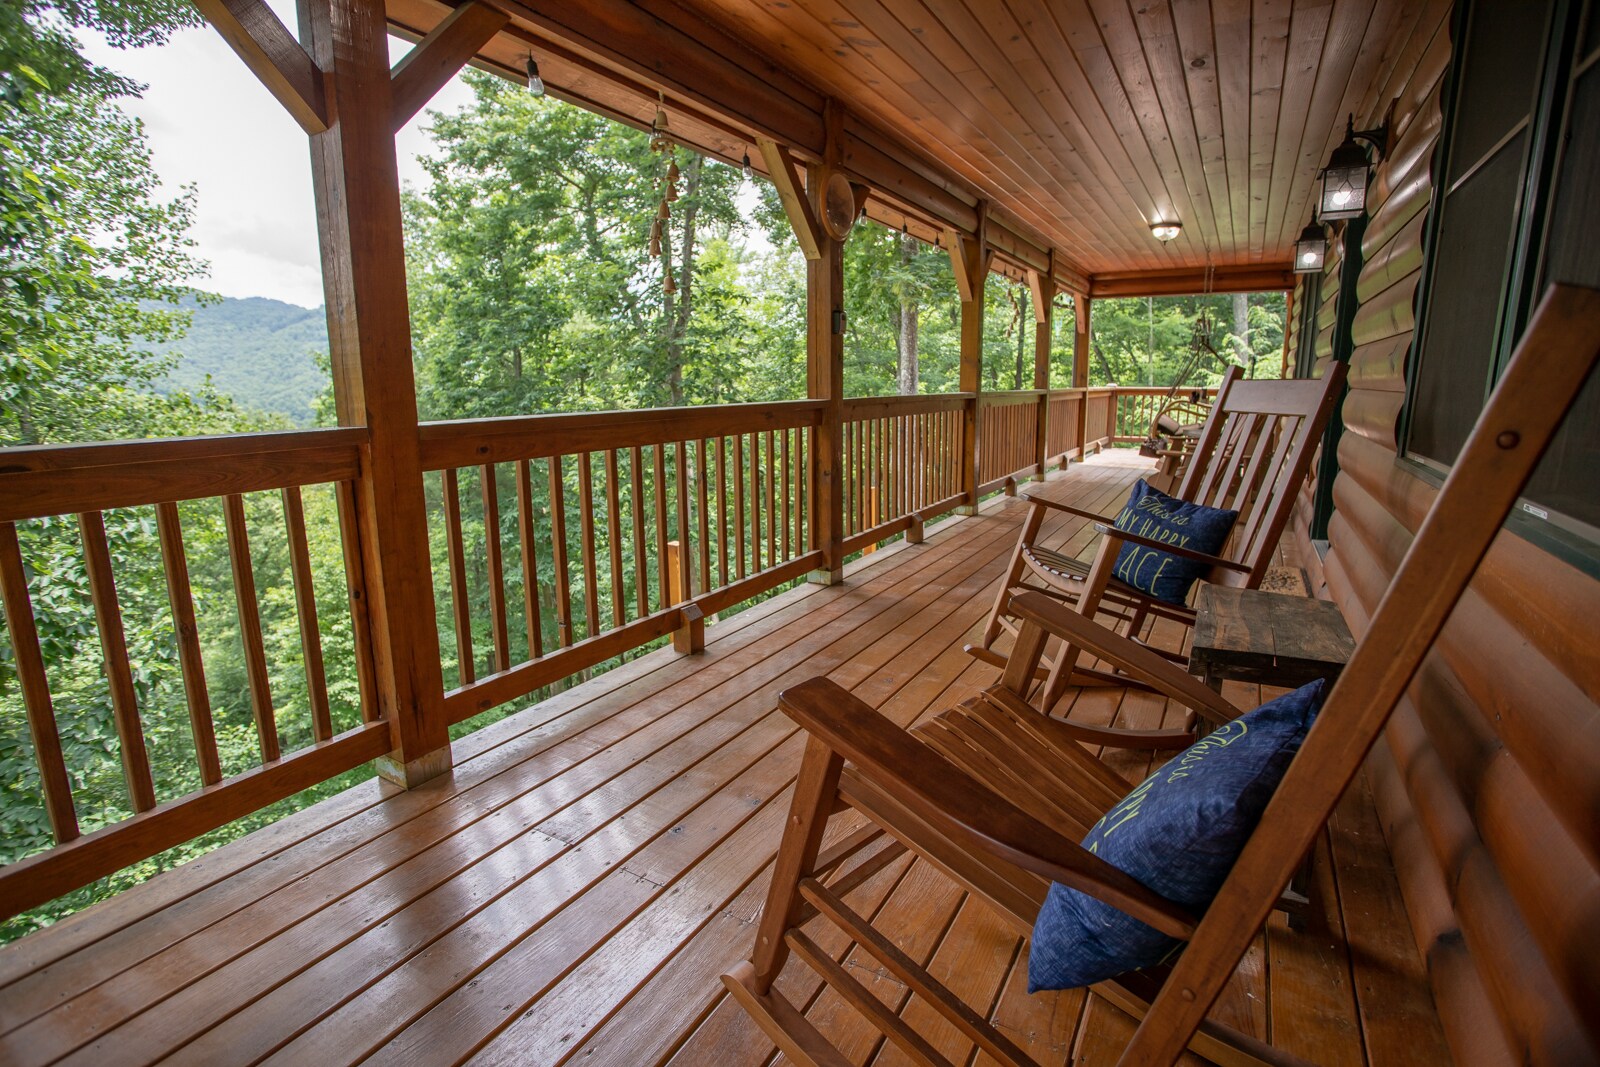 Long covered porch to relax on and take in the view